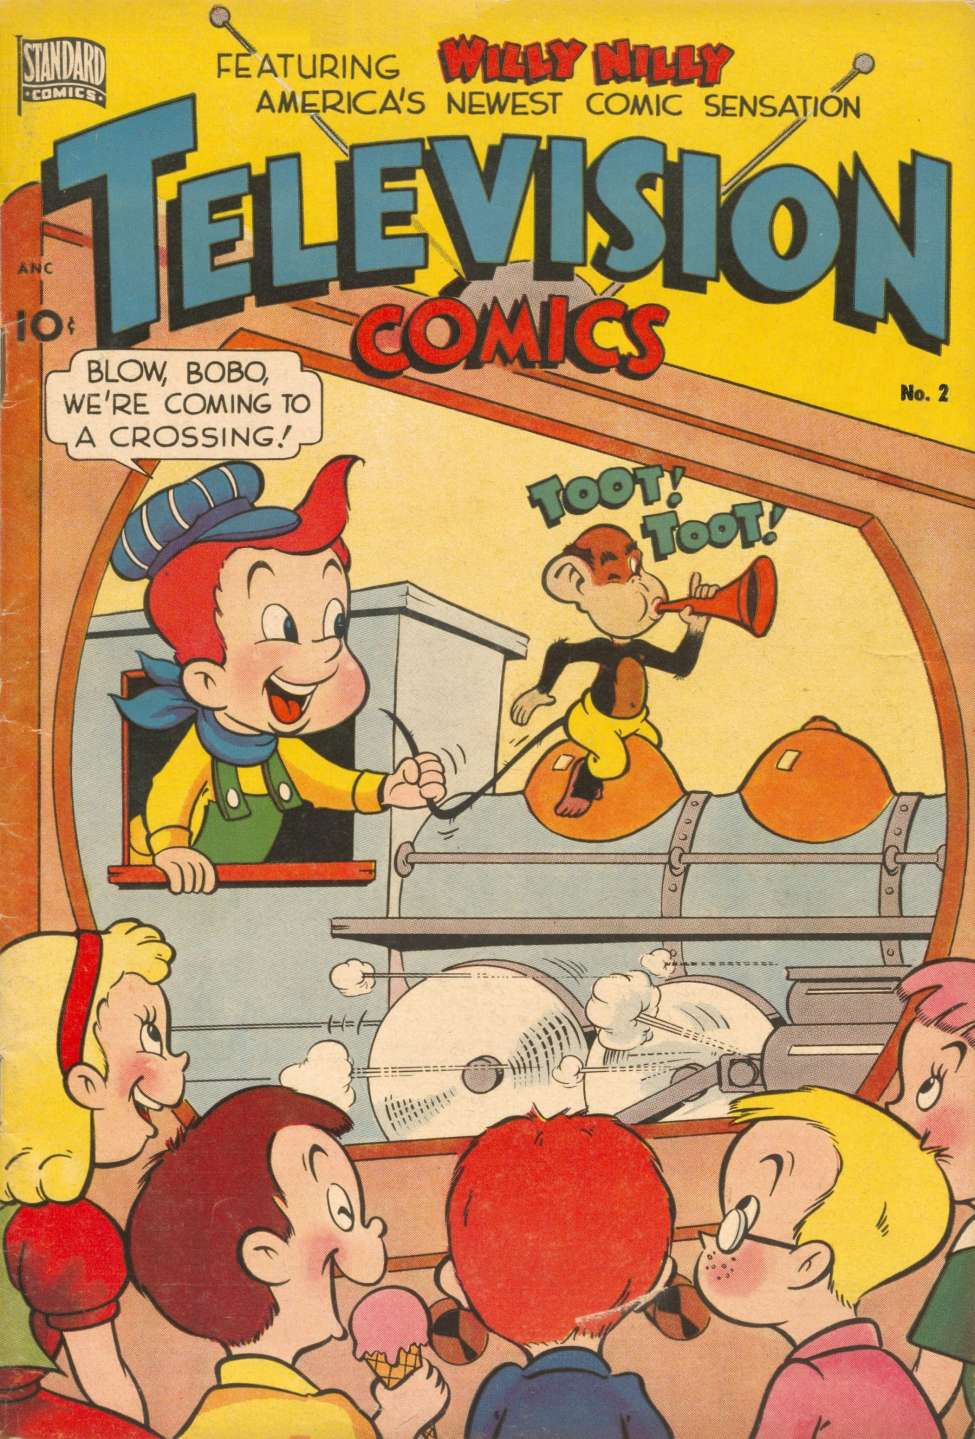 Book Cover For Television Comics 6